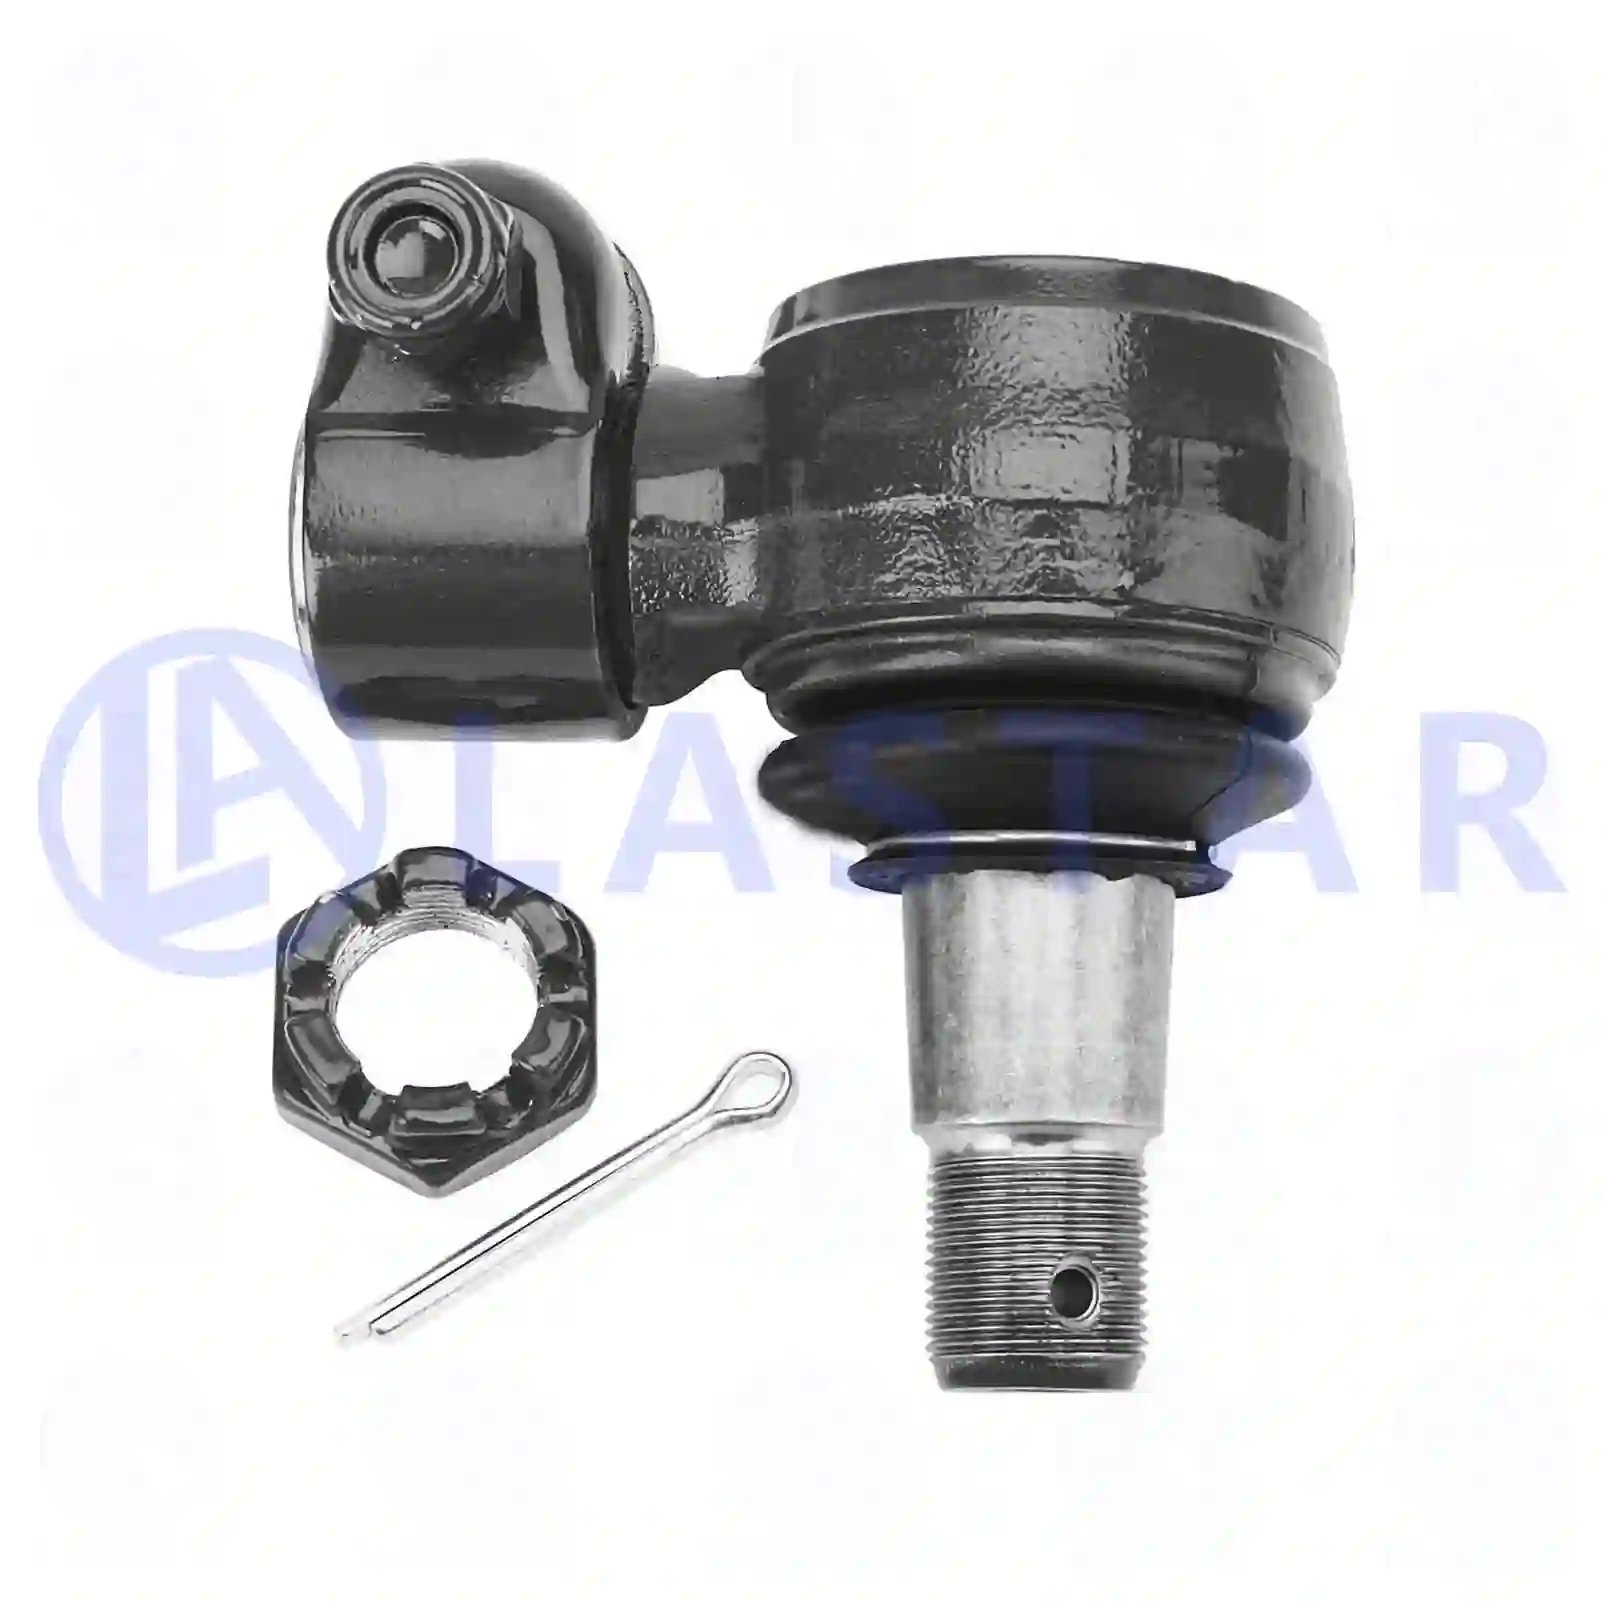 Drag Link Ball joint, right hand thread, la no: 77705115 ,  oem no:42533101, 81953016281, 81953016337, 82953016016, 0004634529, 0014606948, 5001849880, 1394444, ZG40403-0008 Lastar Spare Part | Truck Spare Parts, Auotomotive Spare Parts